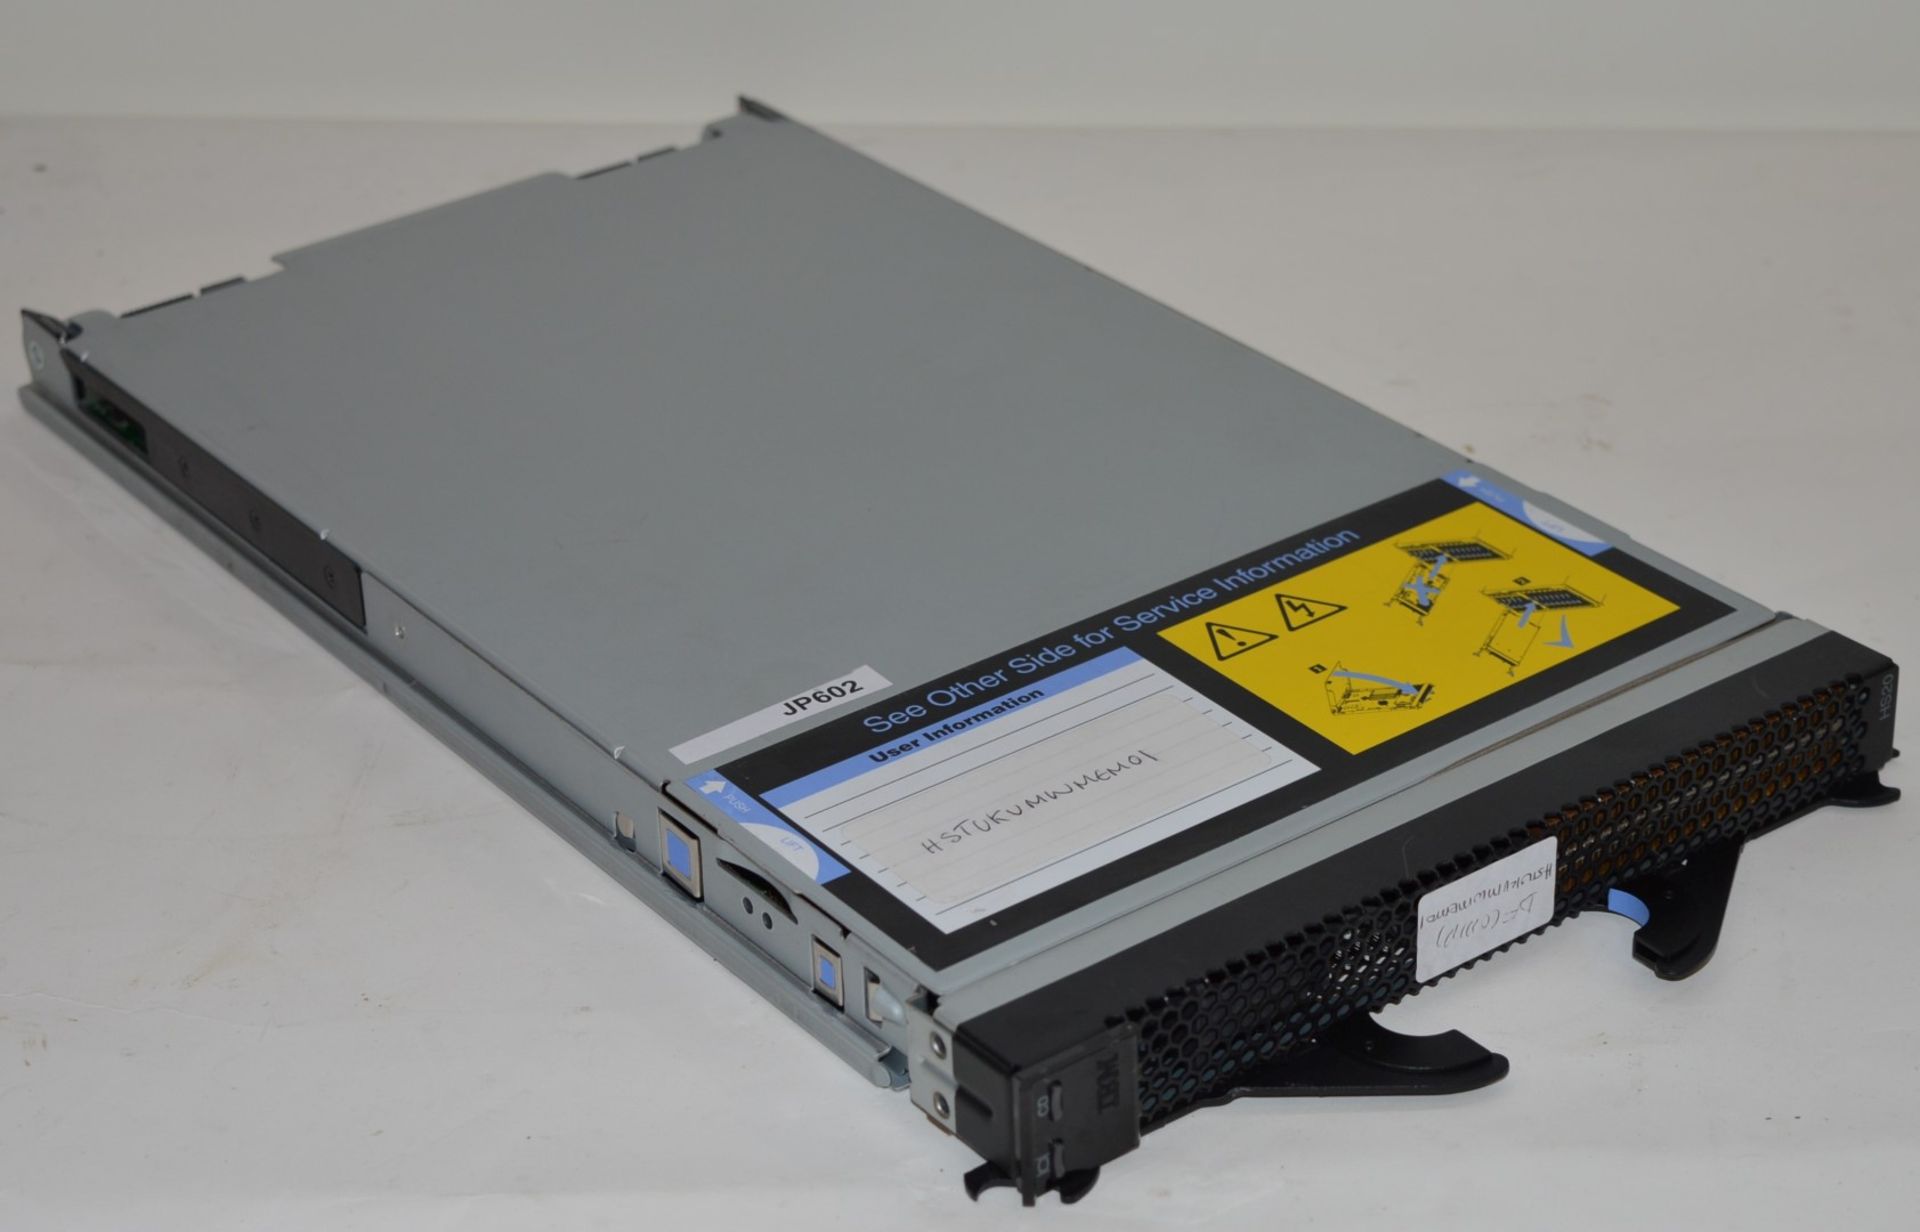 1 x IBM HS20 Blade Server - Model 35G - Includes 1 x Xeon Processors and 3gb Ram - CL400 - Ref JP203